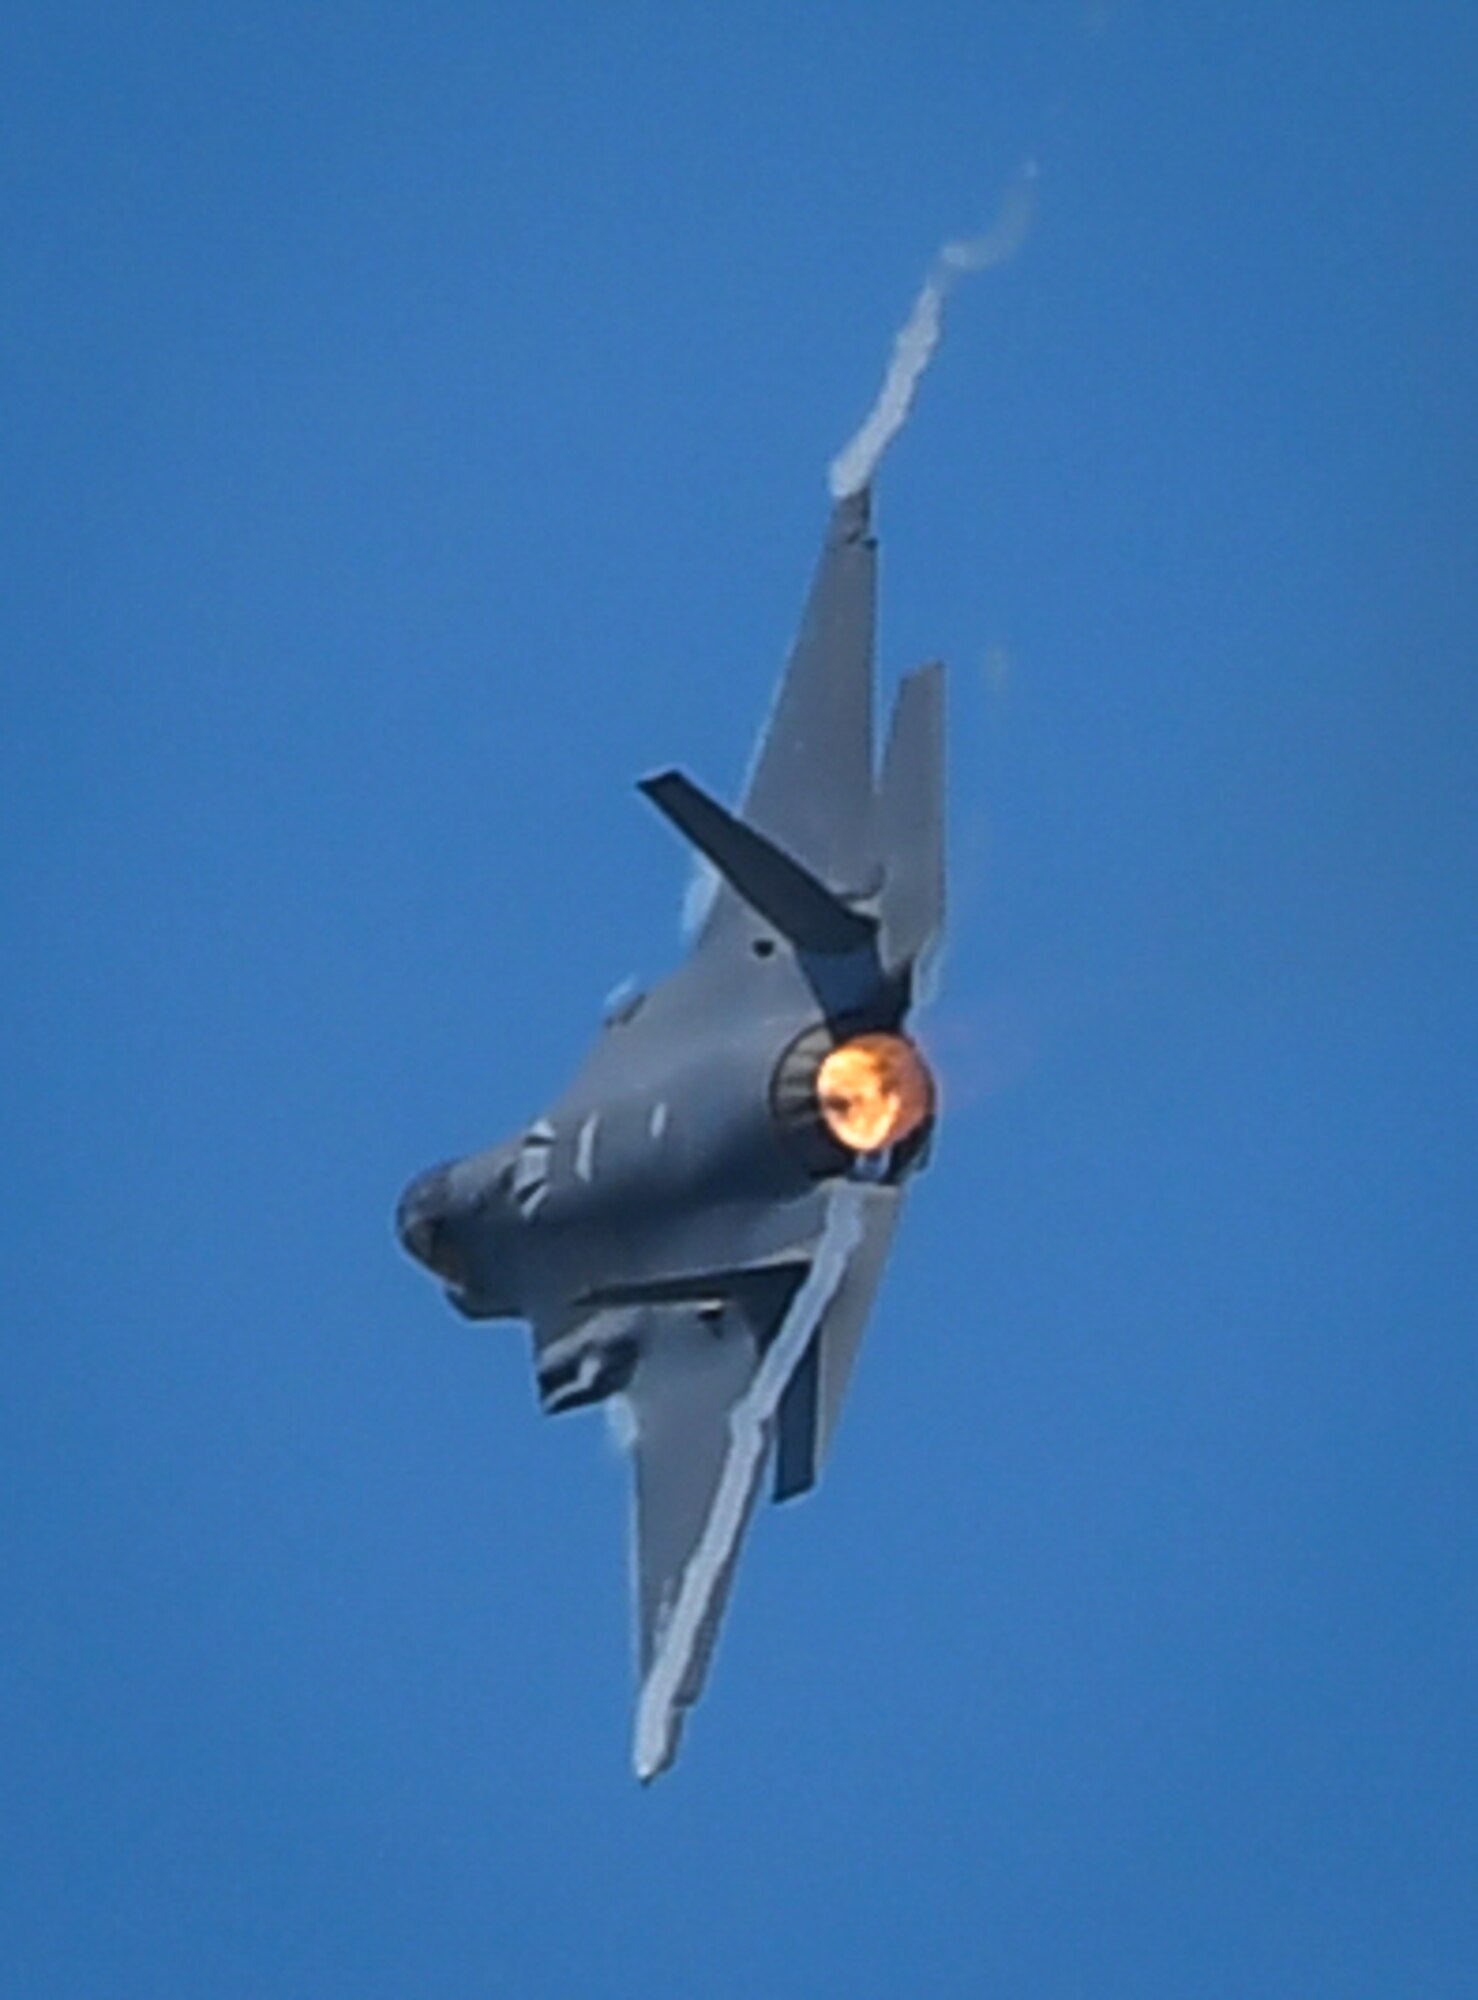 An F-35A Lightning II from Hill Air Force Base, Utah, performs a flight demonstration for an audience at the Paris Air Show June 19, 2017 at Le Bourget, France. Held every year, the Paris Air Show represents a unique opportunity for the United States to showcase its leadership in aerospace technologies. Direct participation in the air show supports U.S. government security policy and strategic defense objectives. (U.S. Air Force photo/ Tech. Sgt. Ryan Crane)